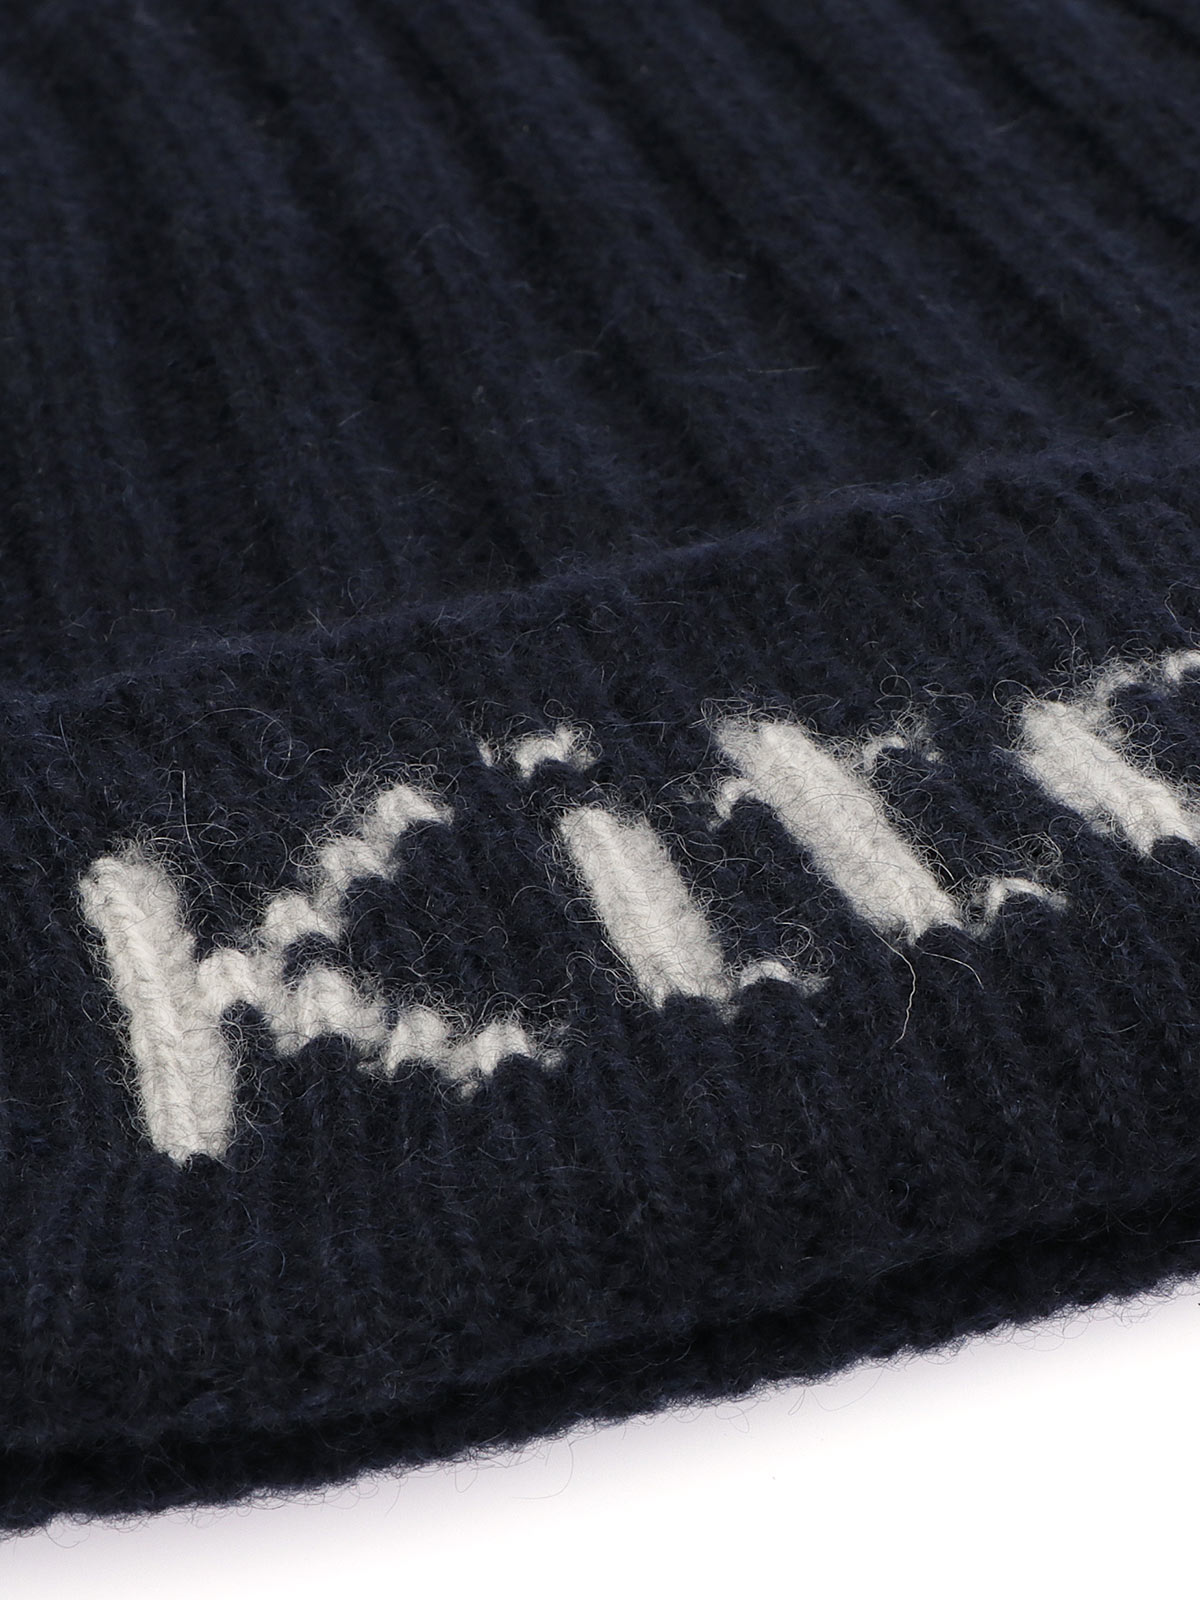 Picture of KITON | Men's Cashmere Ribbed Beanie